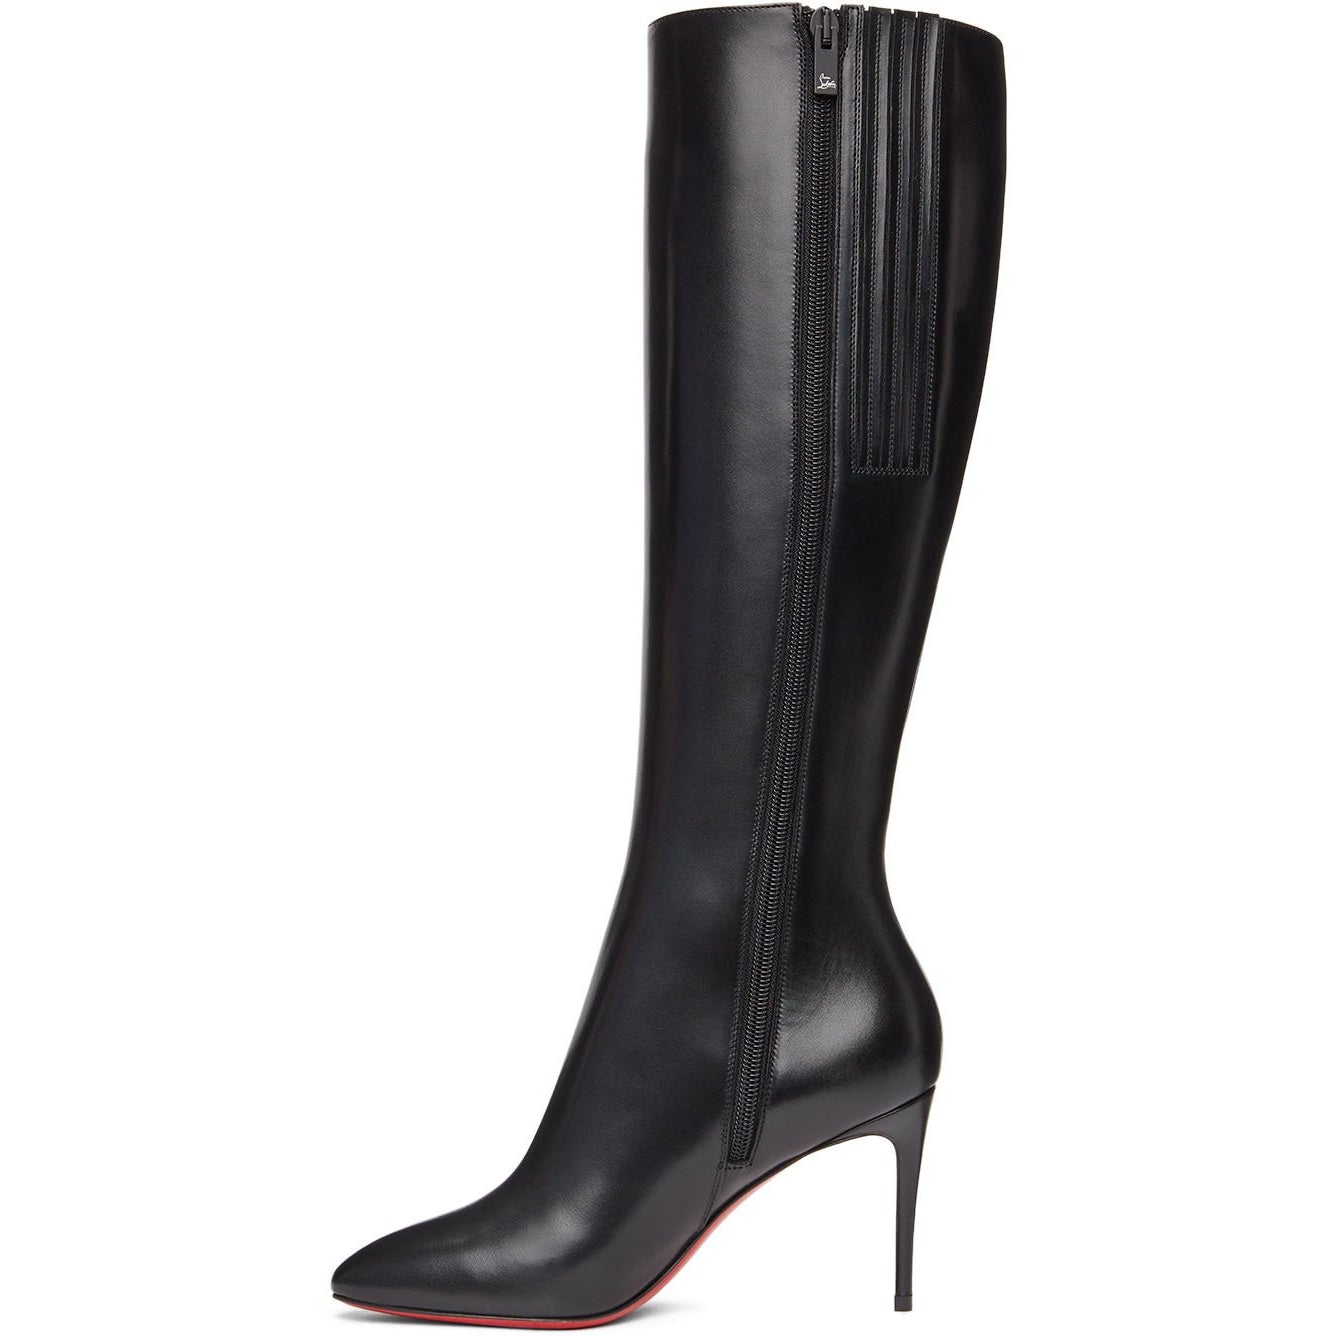 Christian Louboutin Santia Botta 85 Spike Accents Boots - Black Boots,  Shoes - CHT342654